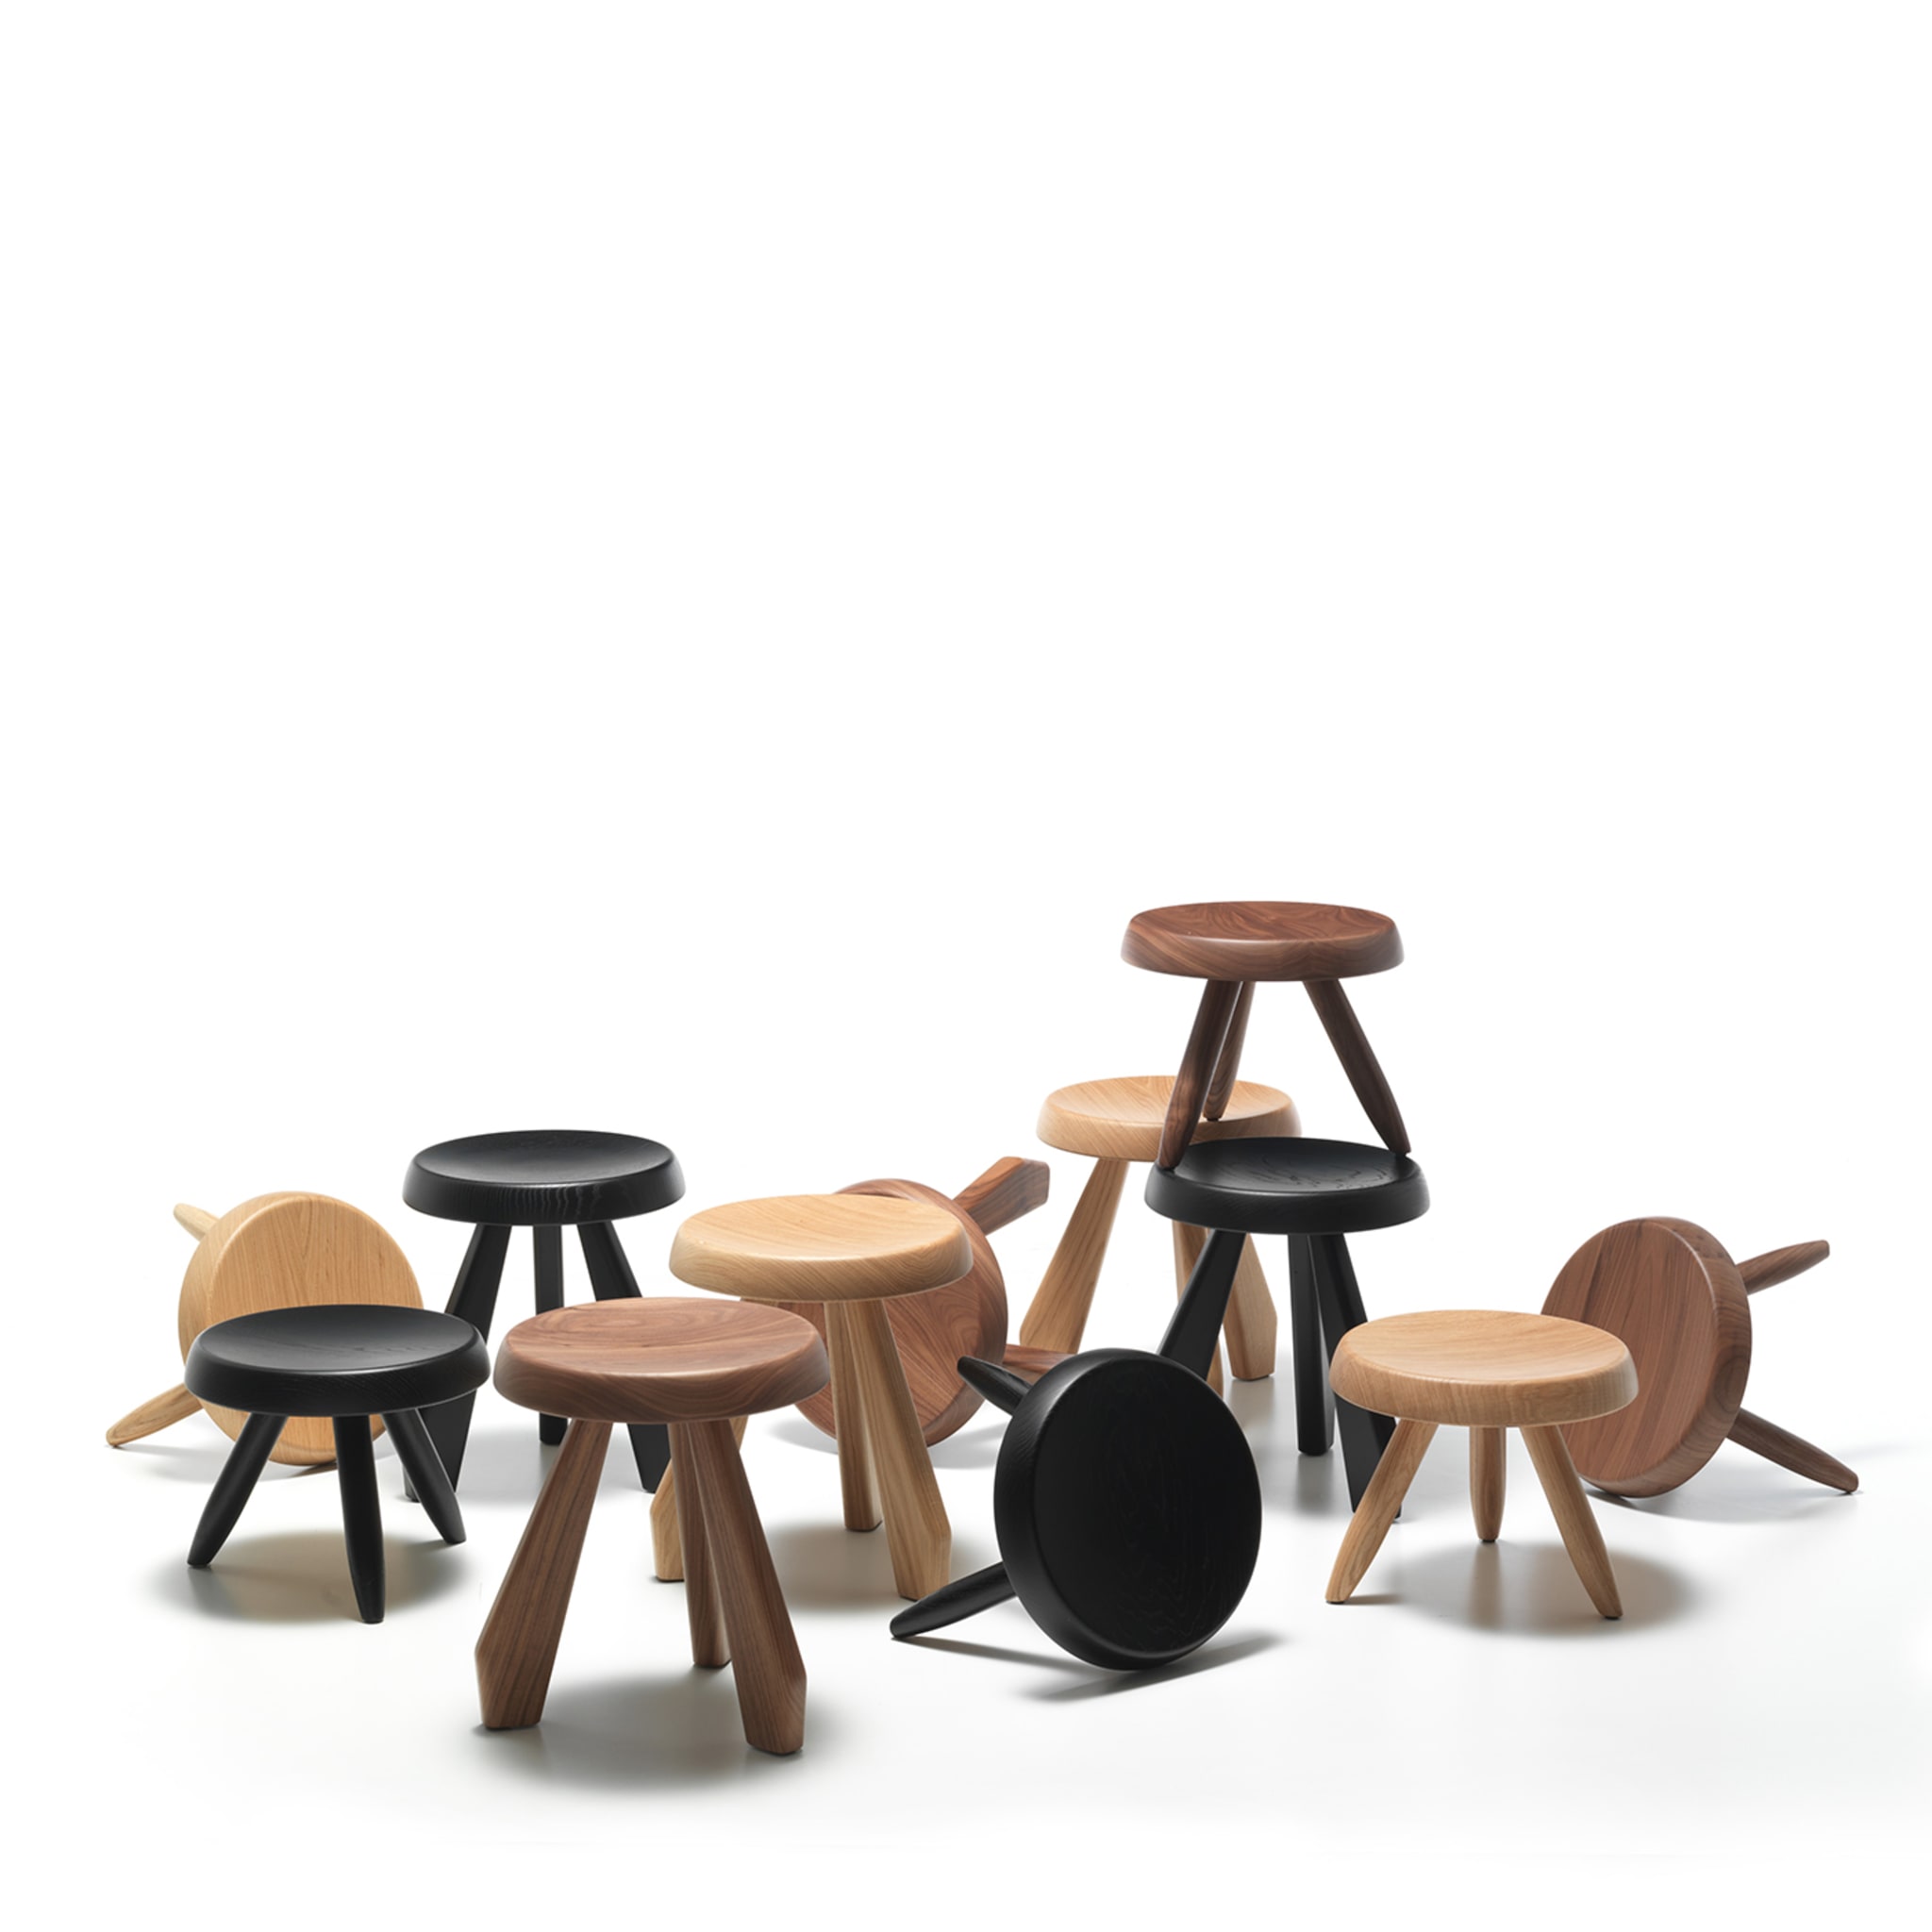 Tabouret Méribel by Charlotte Perriand - Alternative view 2